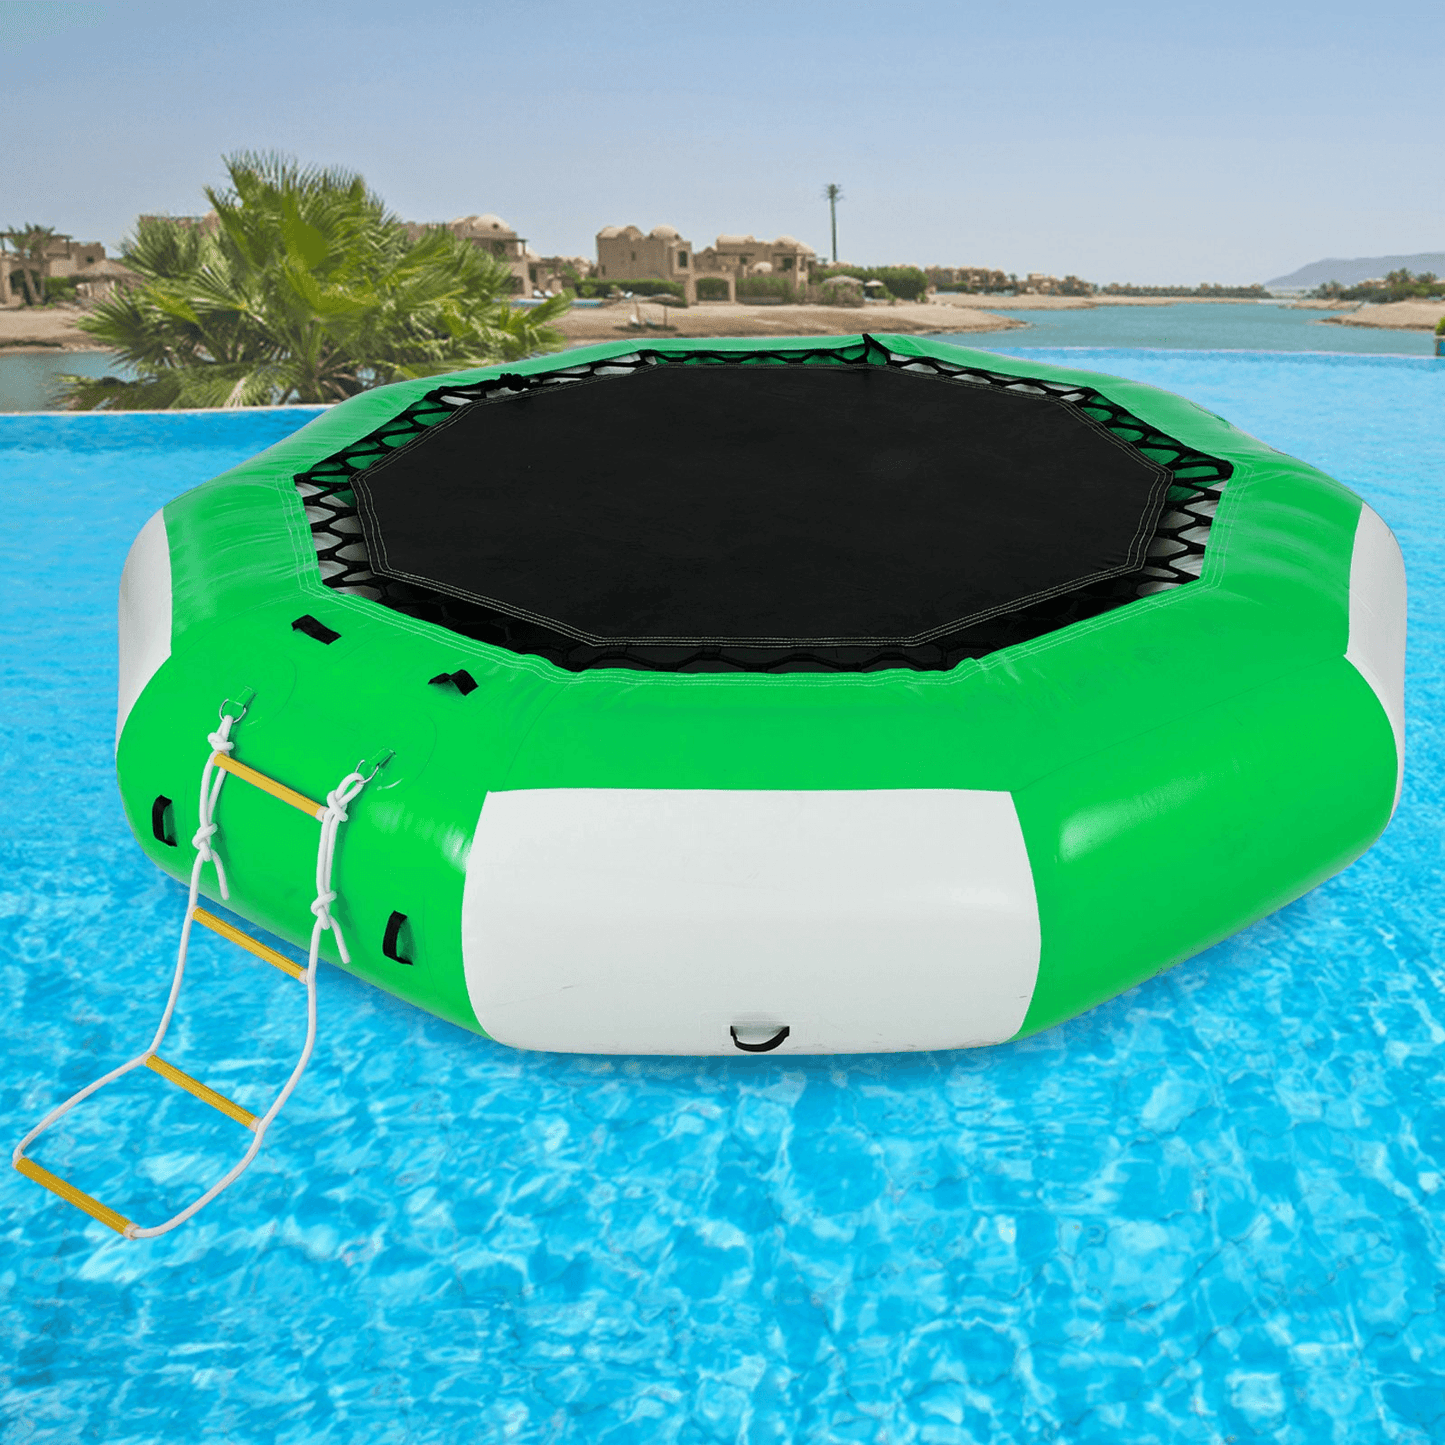 VEVOR Inflatable Water Trampoline 10FT , Round Inflatable Water Bouncer with 4-Step Ladder, Water Trampoline in Green and White for Water Sports. - Loomini